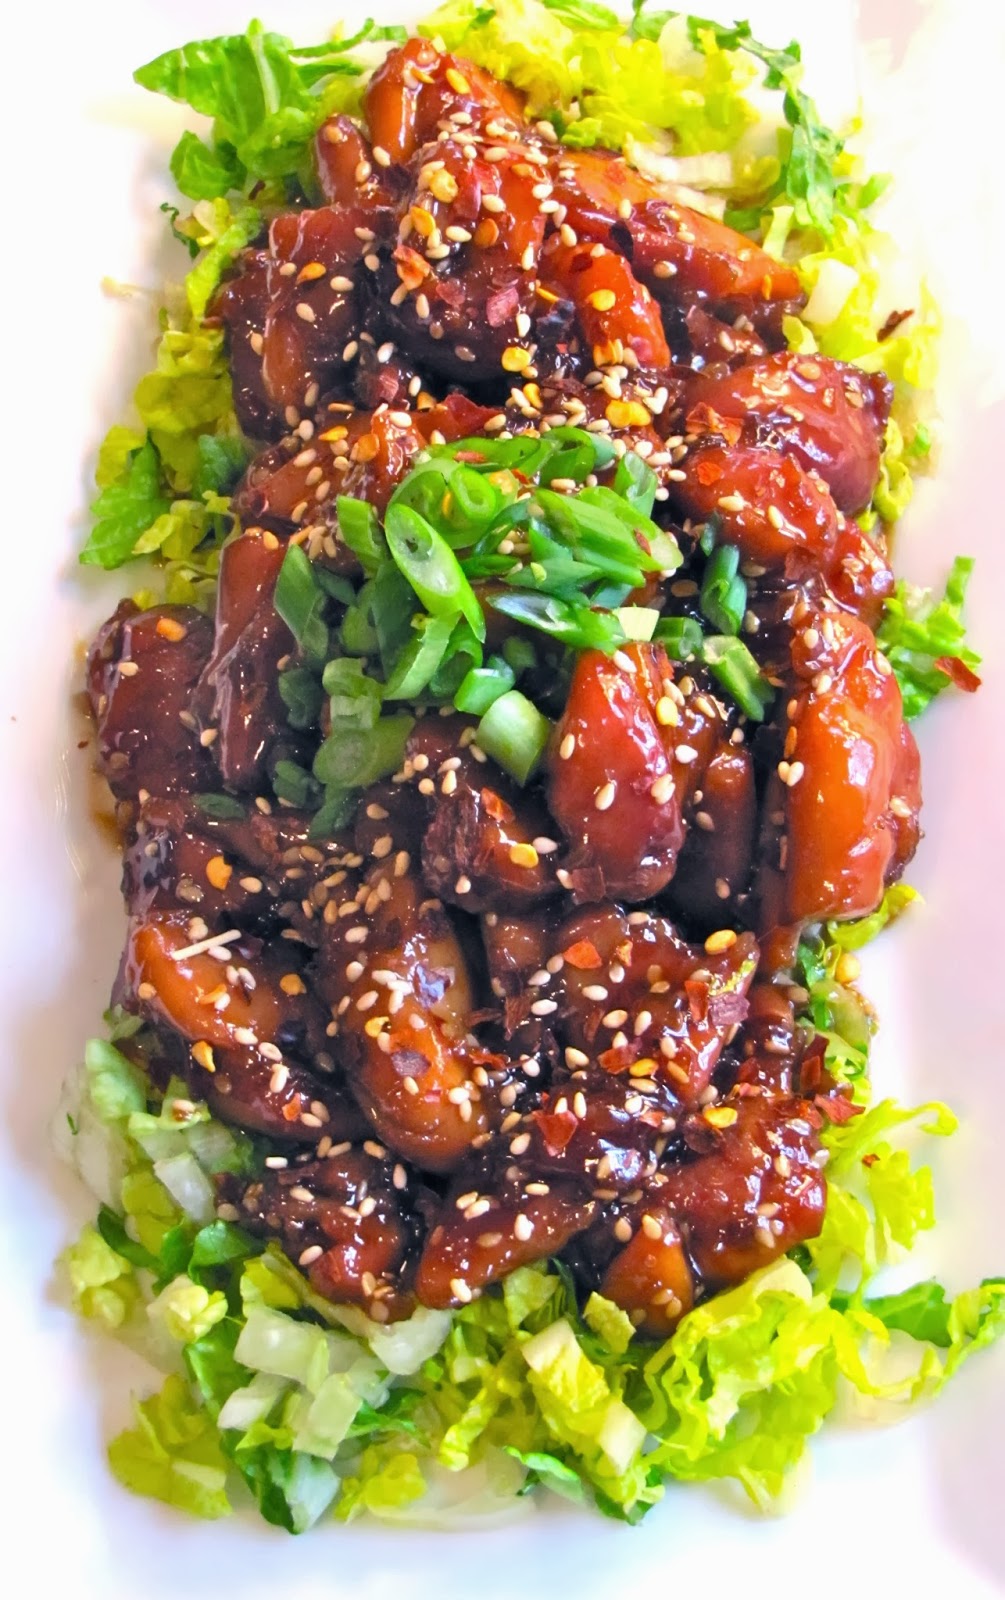 Do You Even Cook, Bro?: Food for Seattle Fans: Cherry Teriyaki Glazed ...